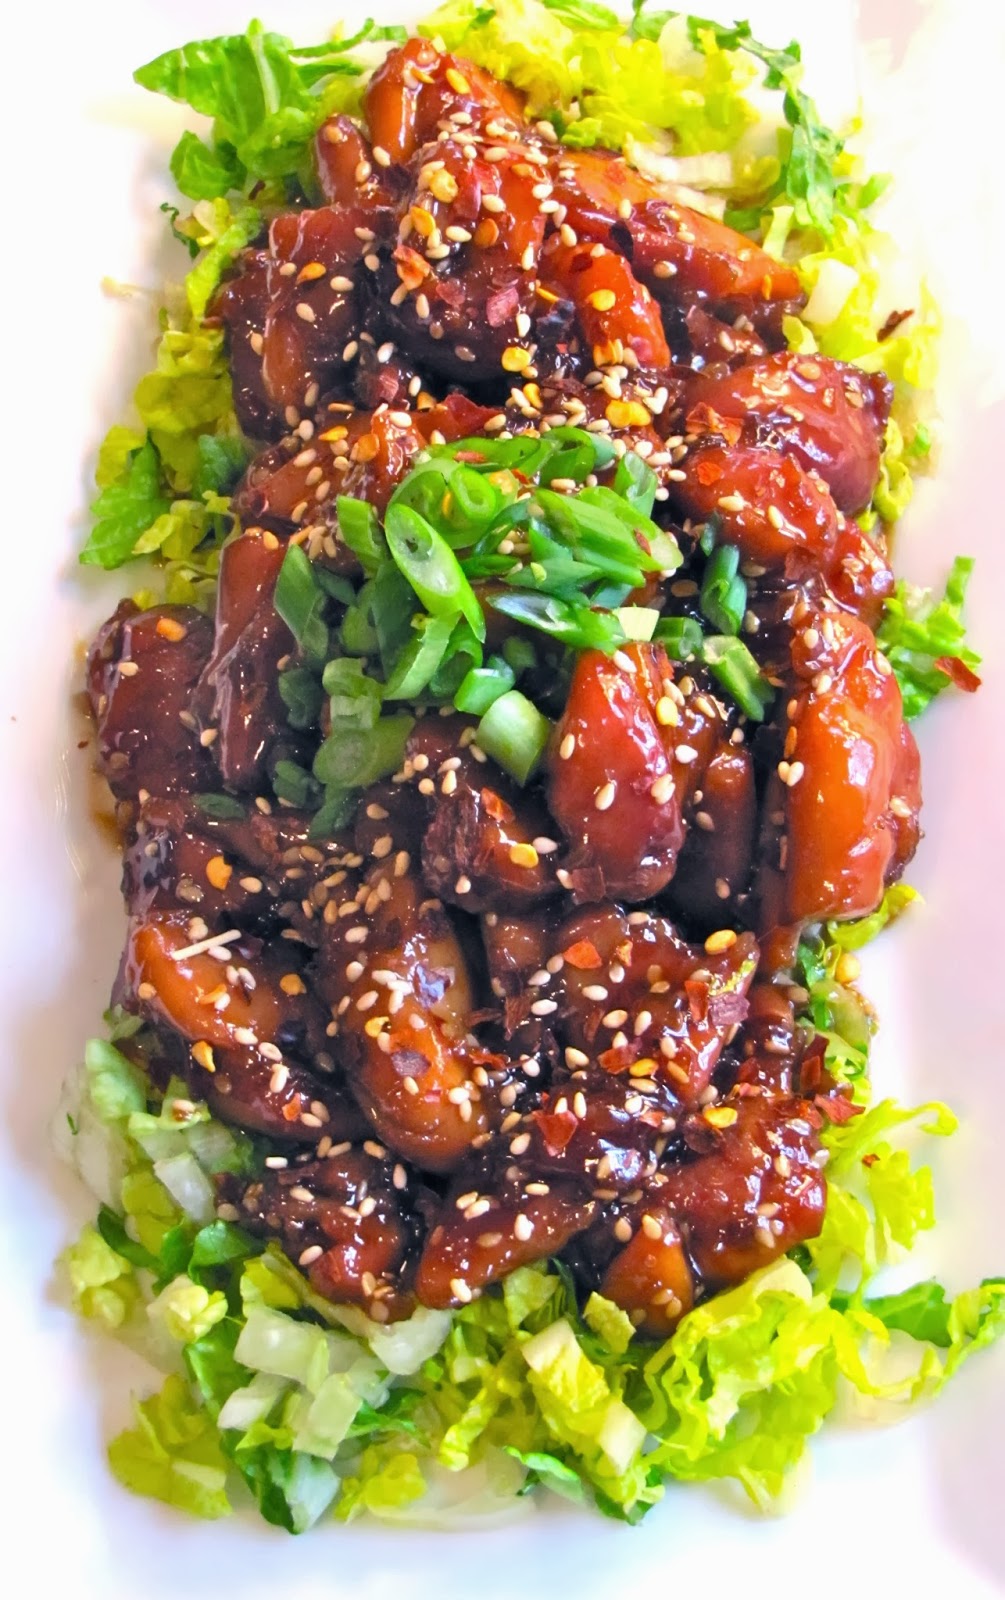 Do You Even Cook, Bro?: Food for Seattle Fans: Cherry Teriyaki Glazed ...